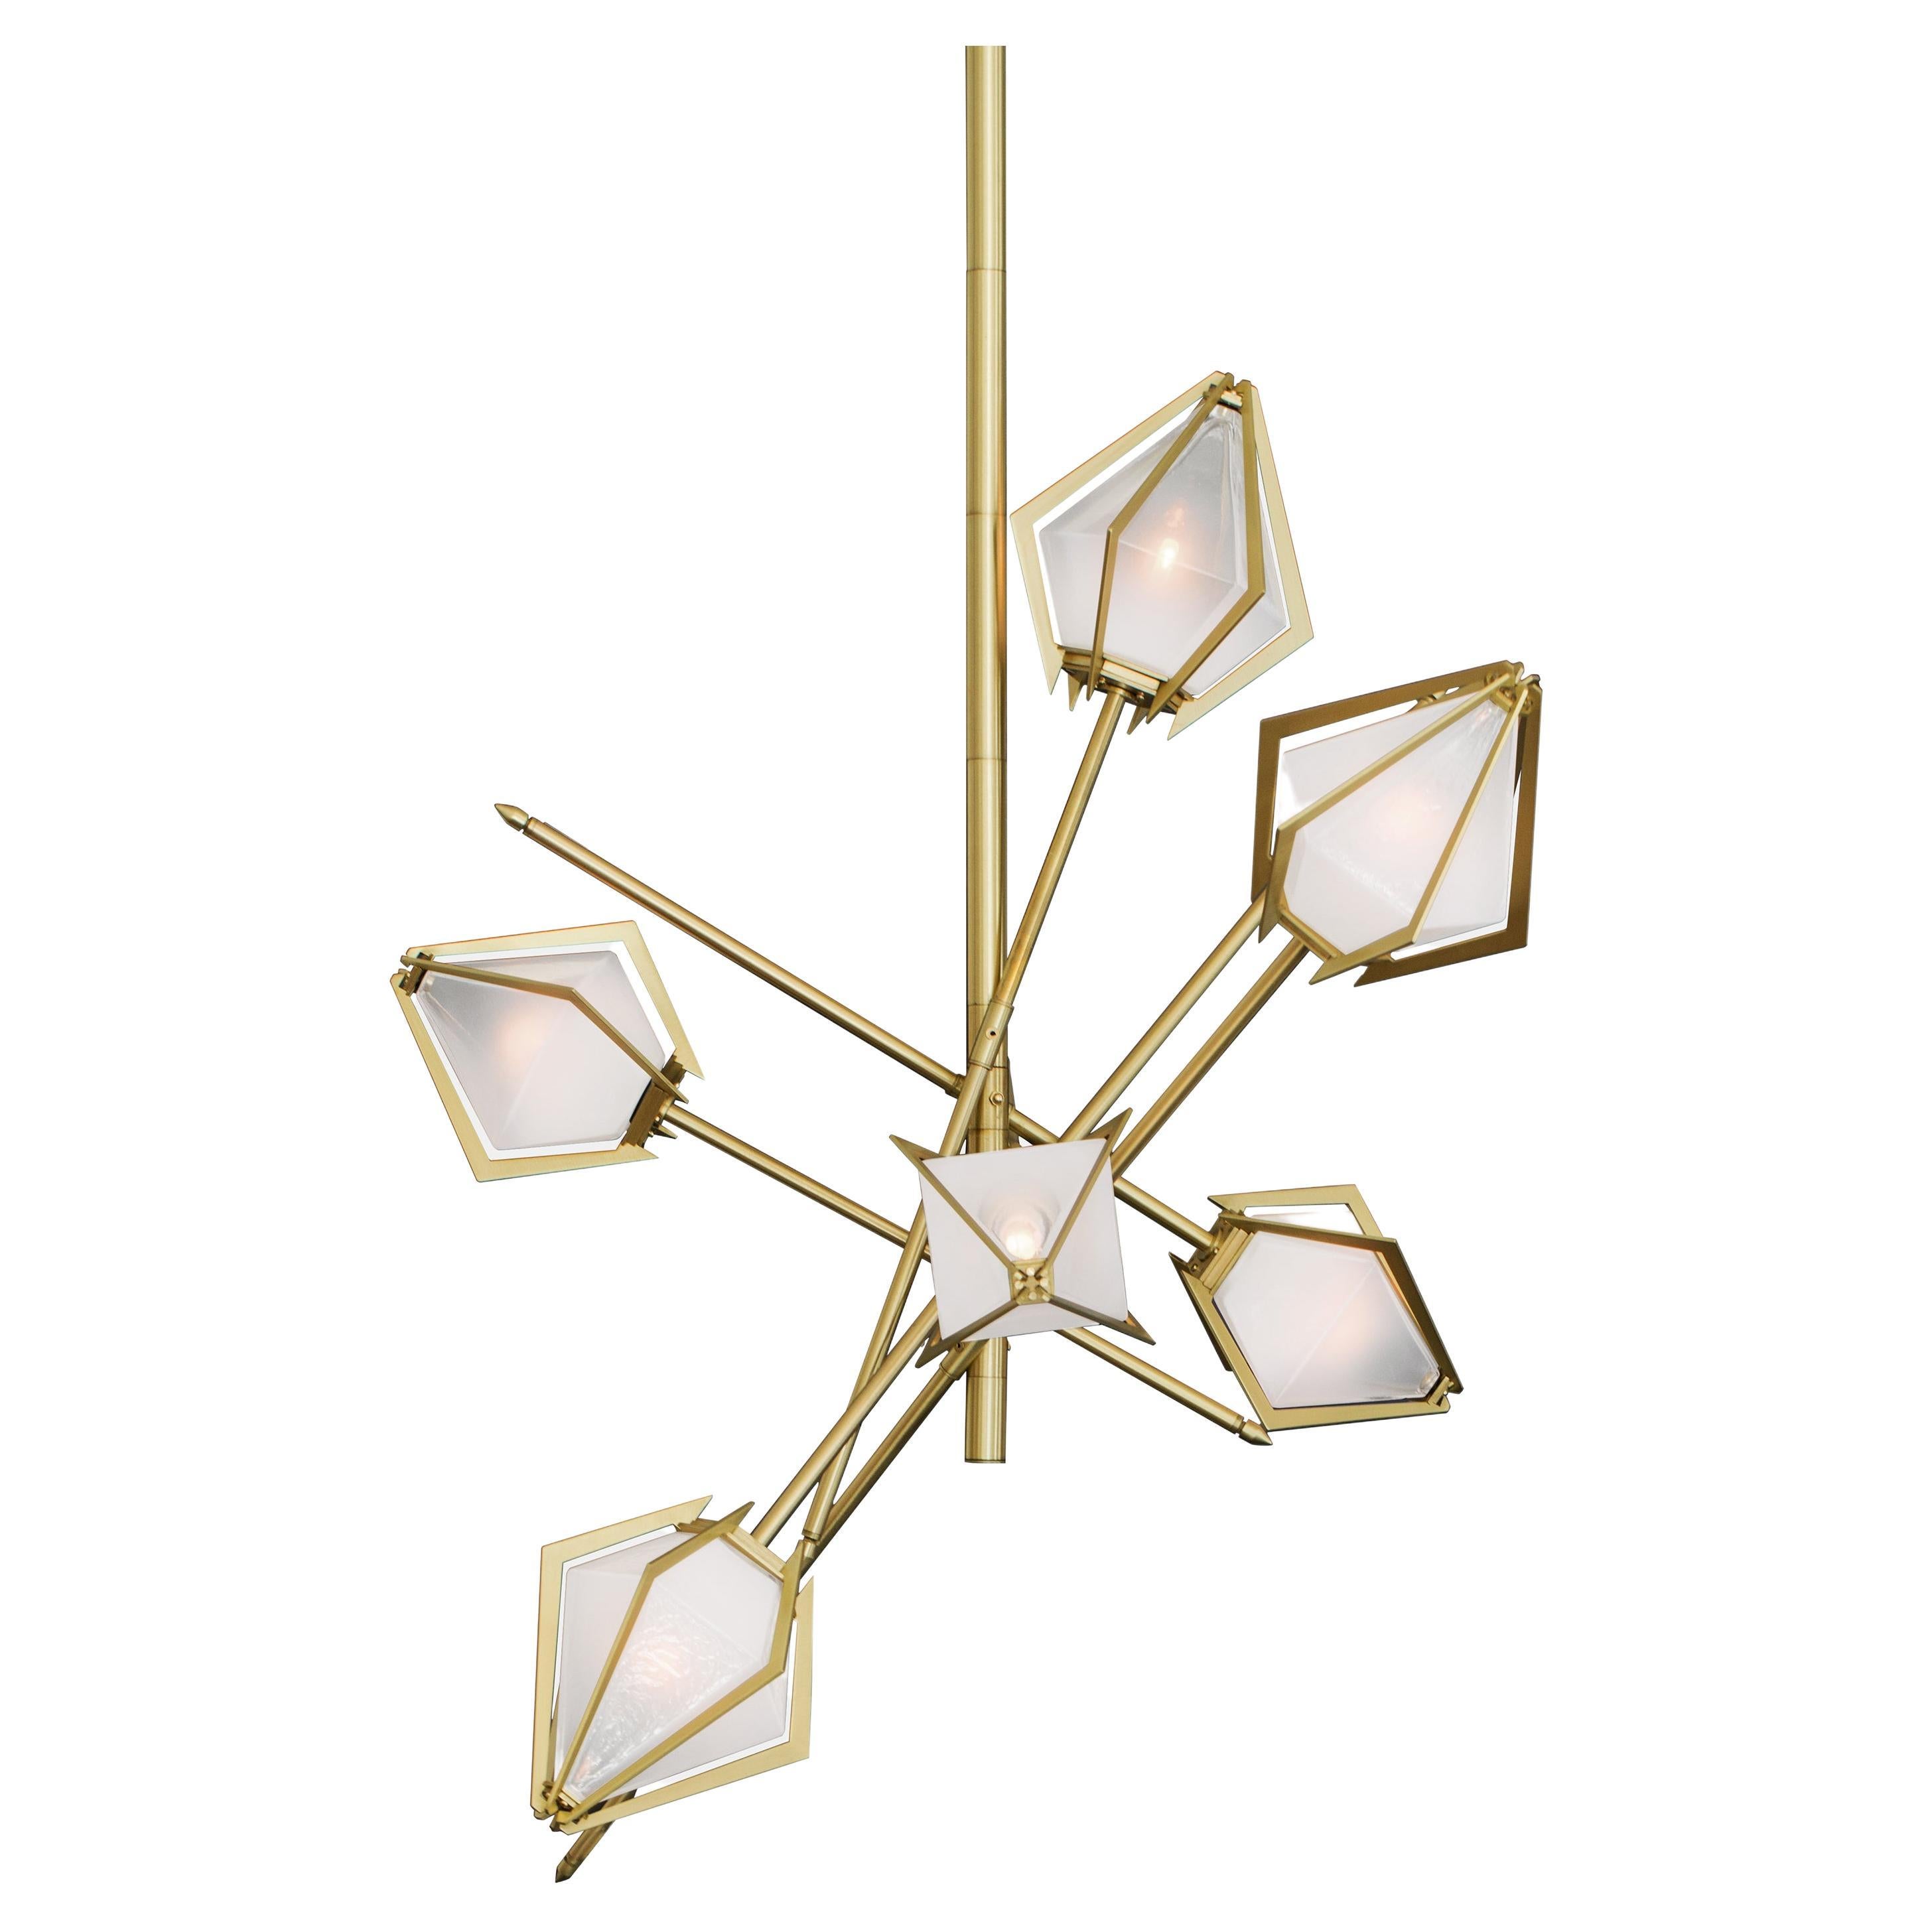 Harlow Small Chandelier in Satin Brass & Alabaster White Glass For Sale